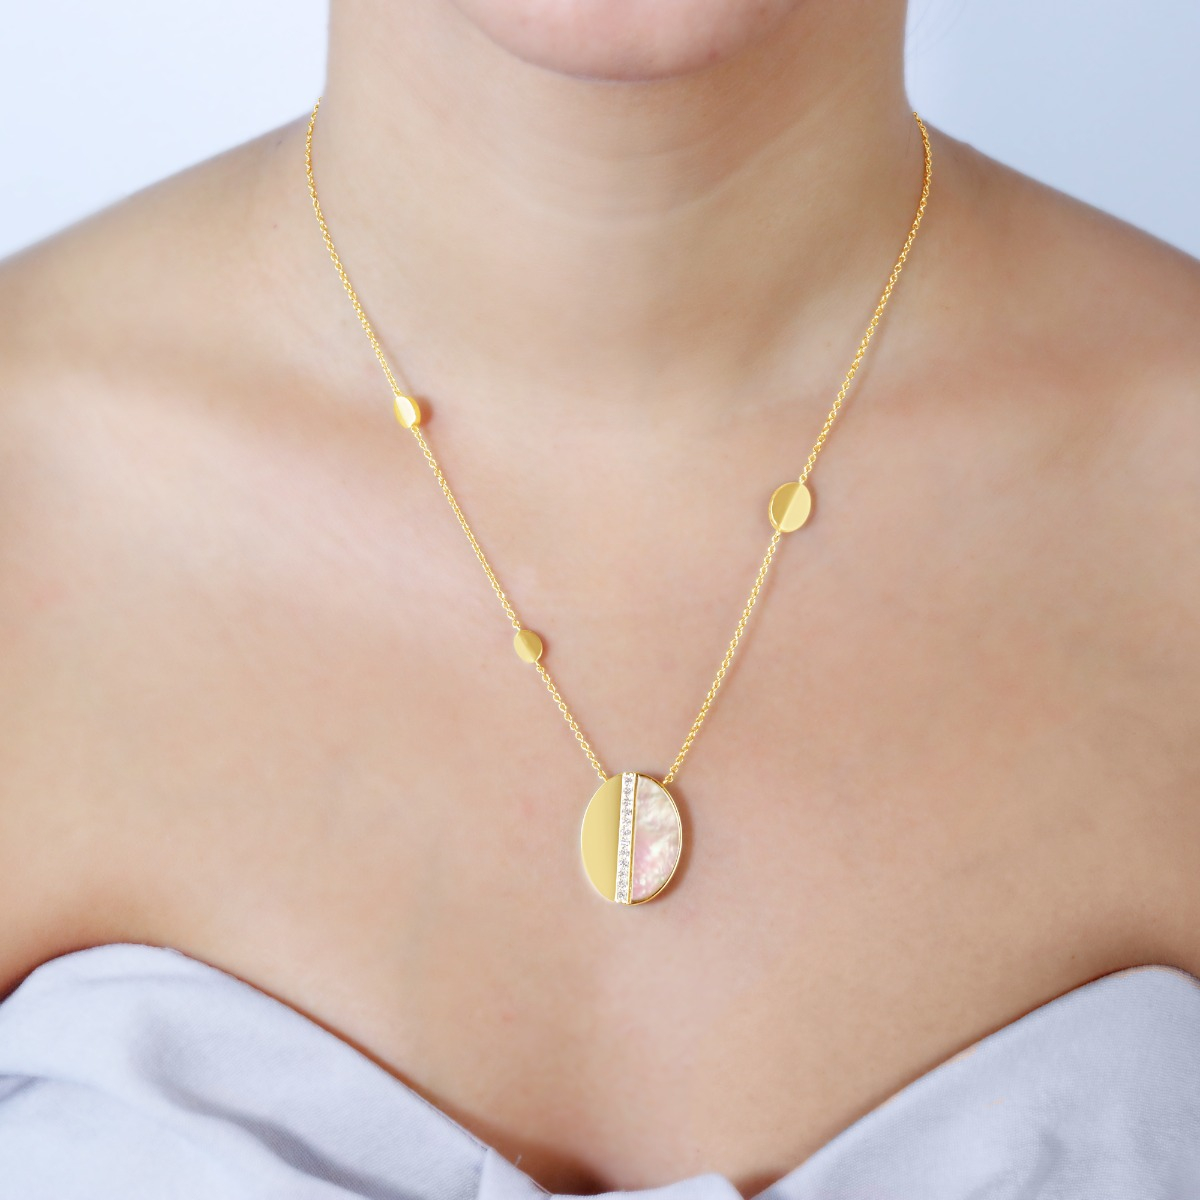 Geometric Opalescent Stone Disk Necklace in 18 K Yellow Gold with White Diamonds